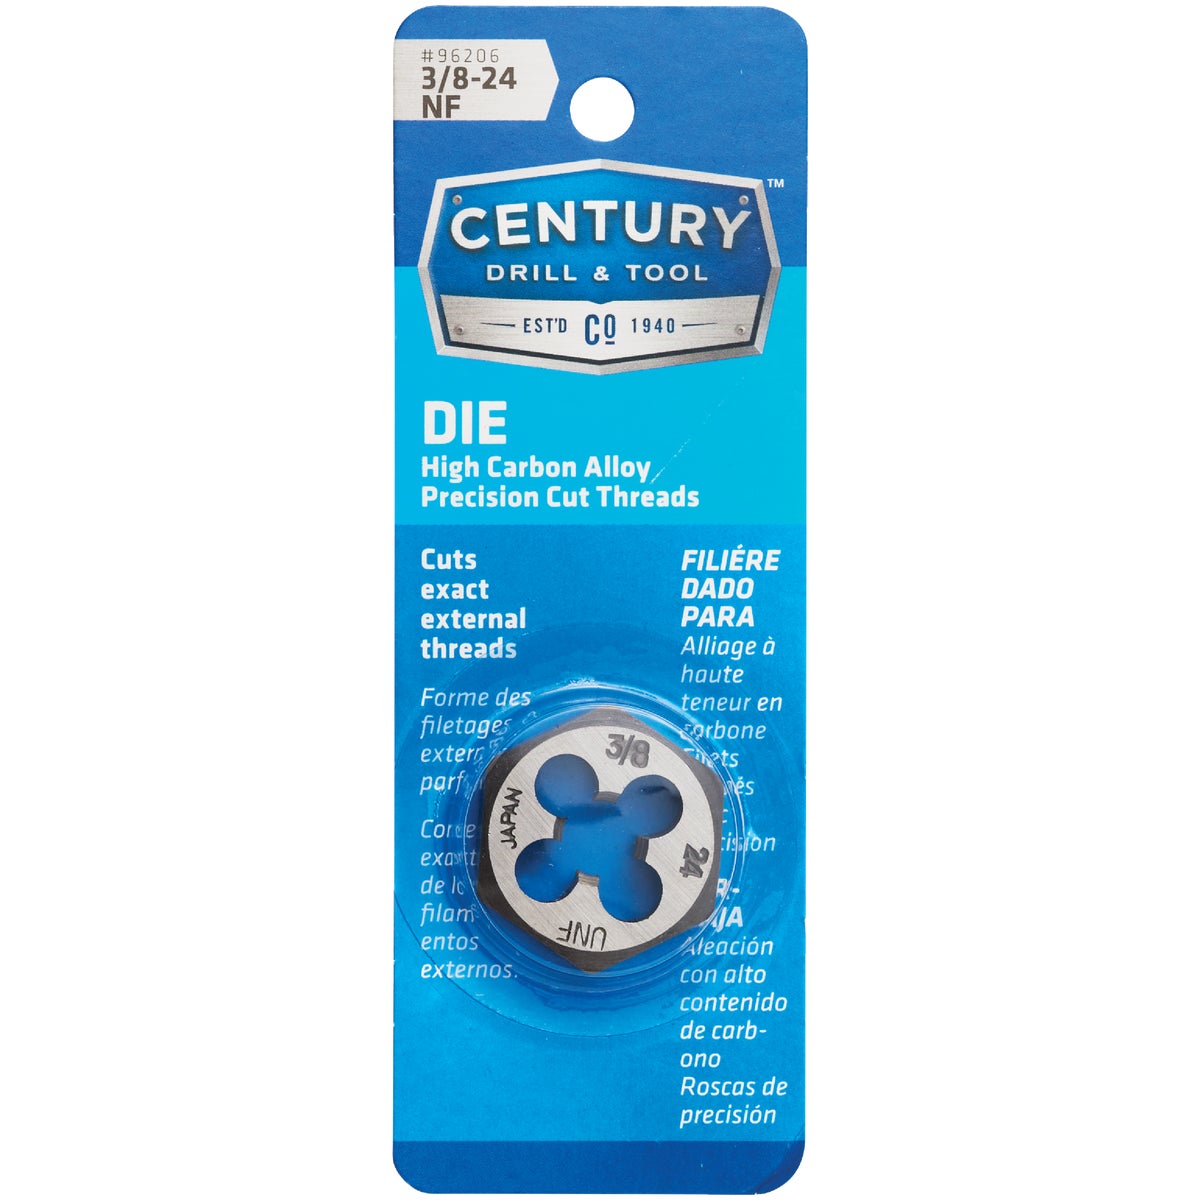 Century Drill & Tool 3/8-24 National Fine 1 In. Across Flats Fractional Hexagon Die